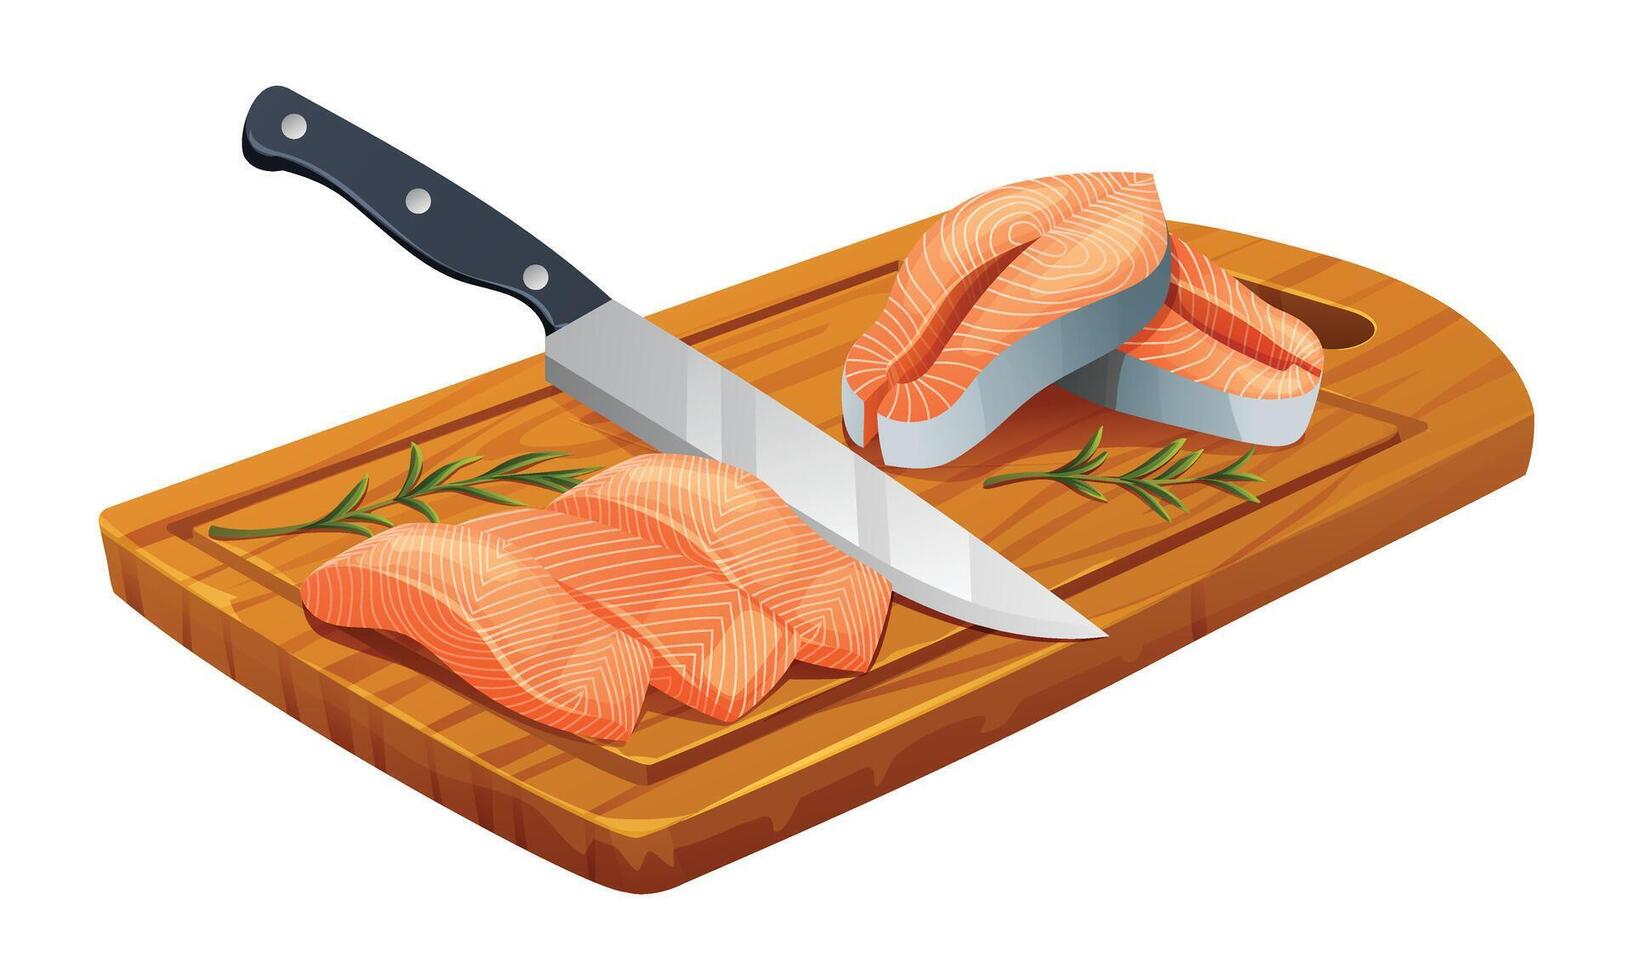 Fresh raw salmon fish fillets and steaks with knife on cutting board. Vector illustration isolated on white background